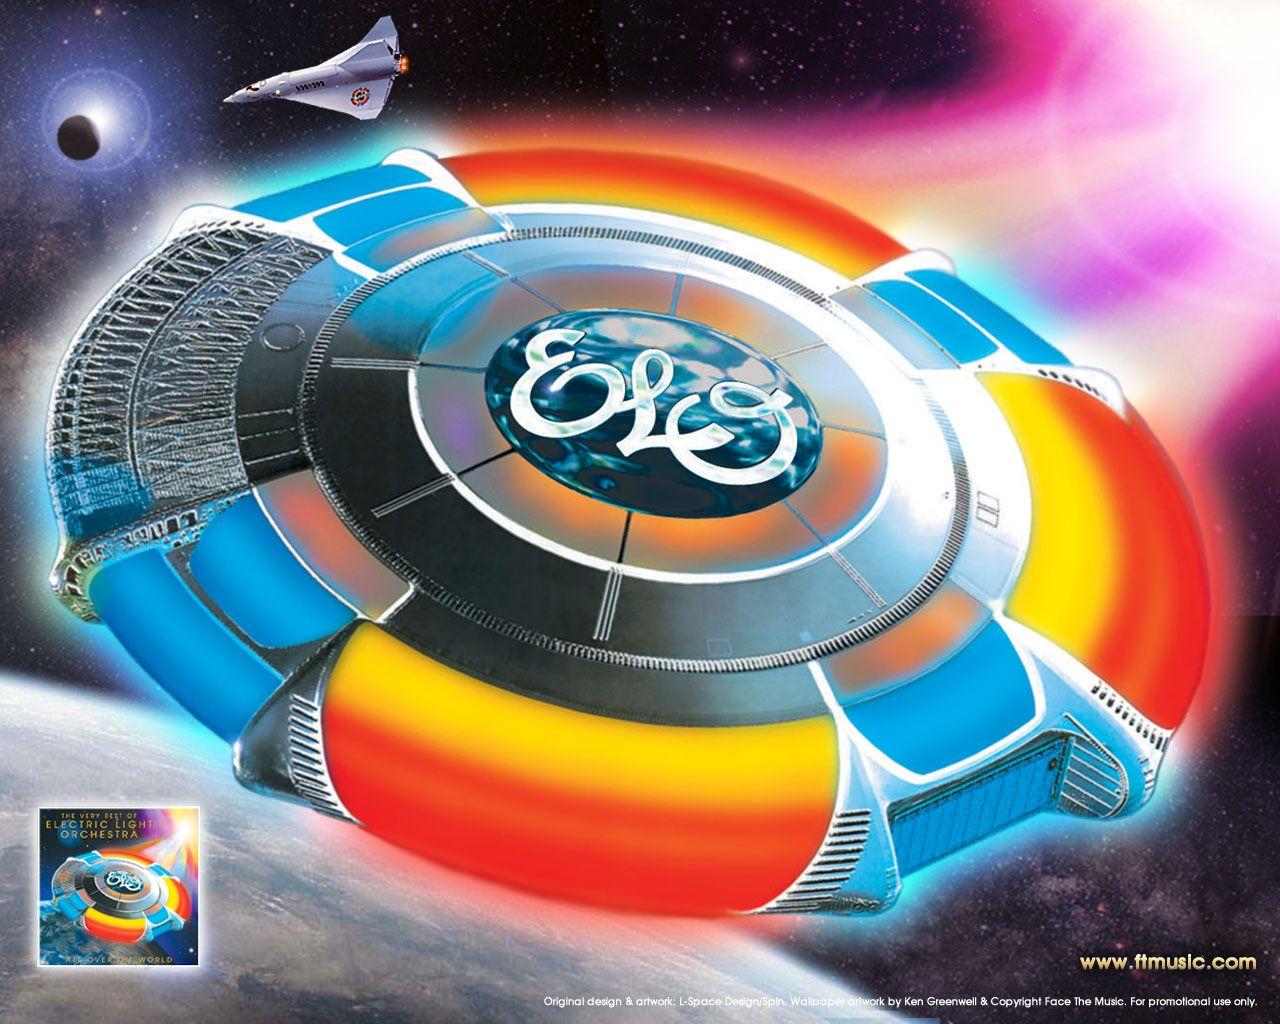 electric light orchestra logo